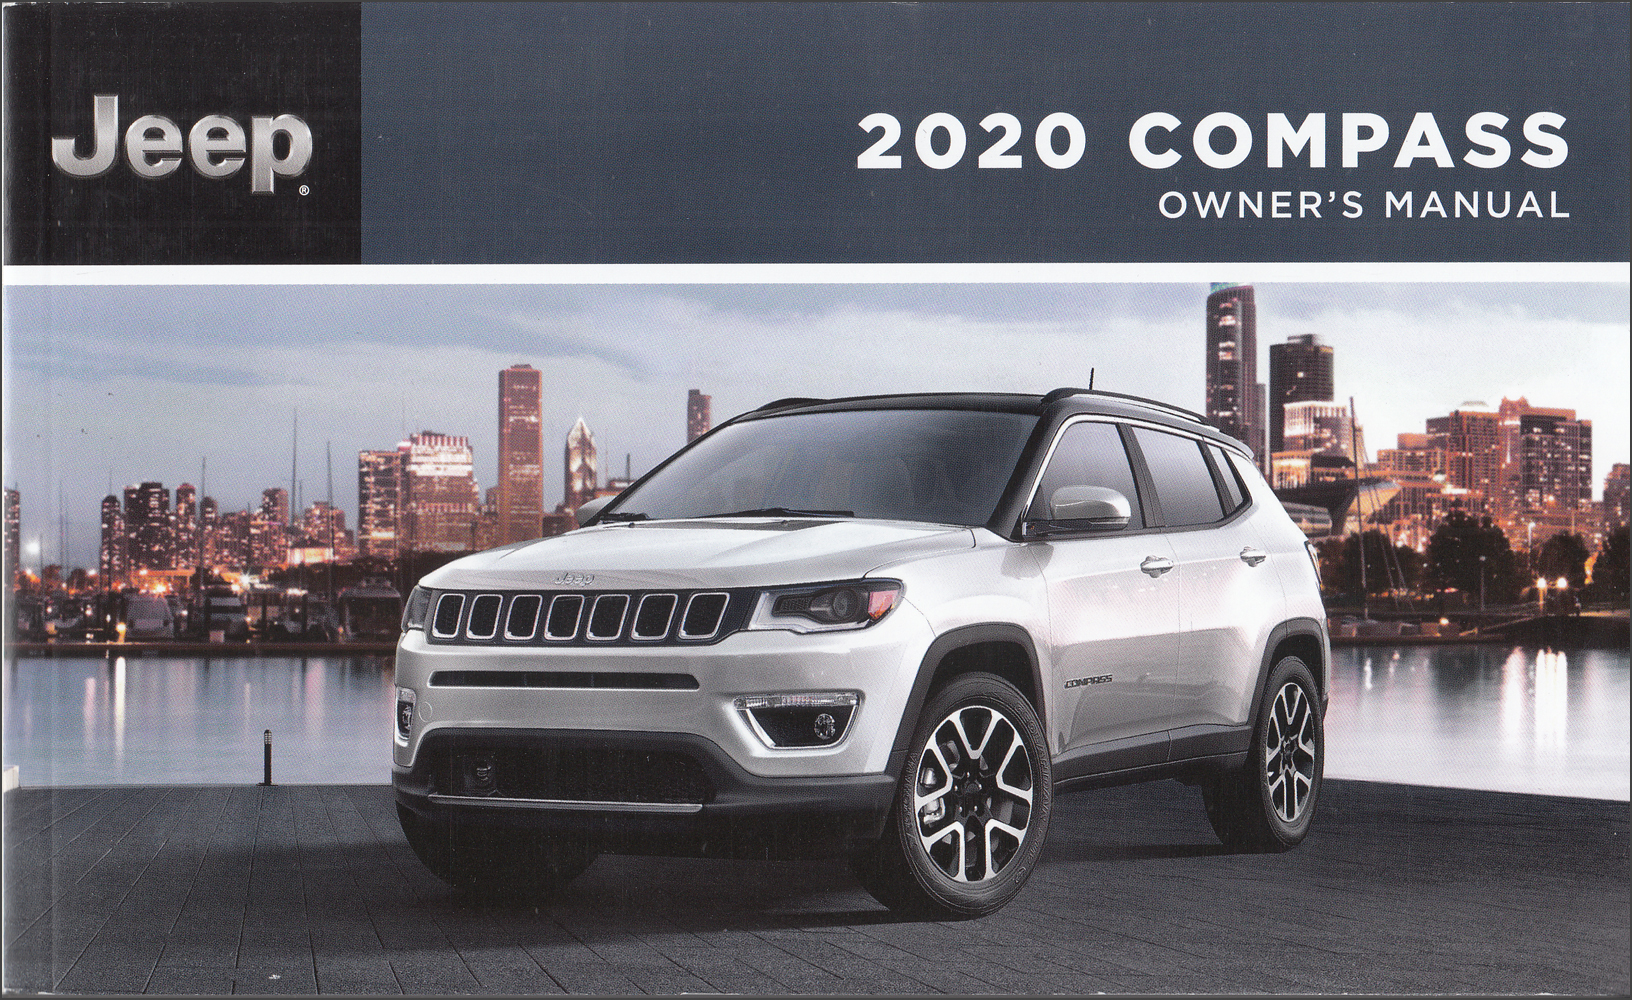 2020 Jeep Compass Owner's Manual Original Extended 414-page version